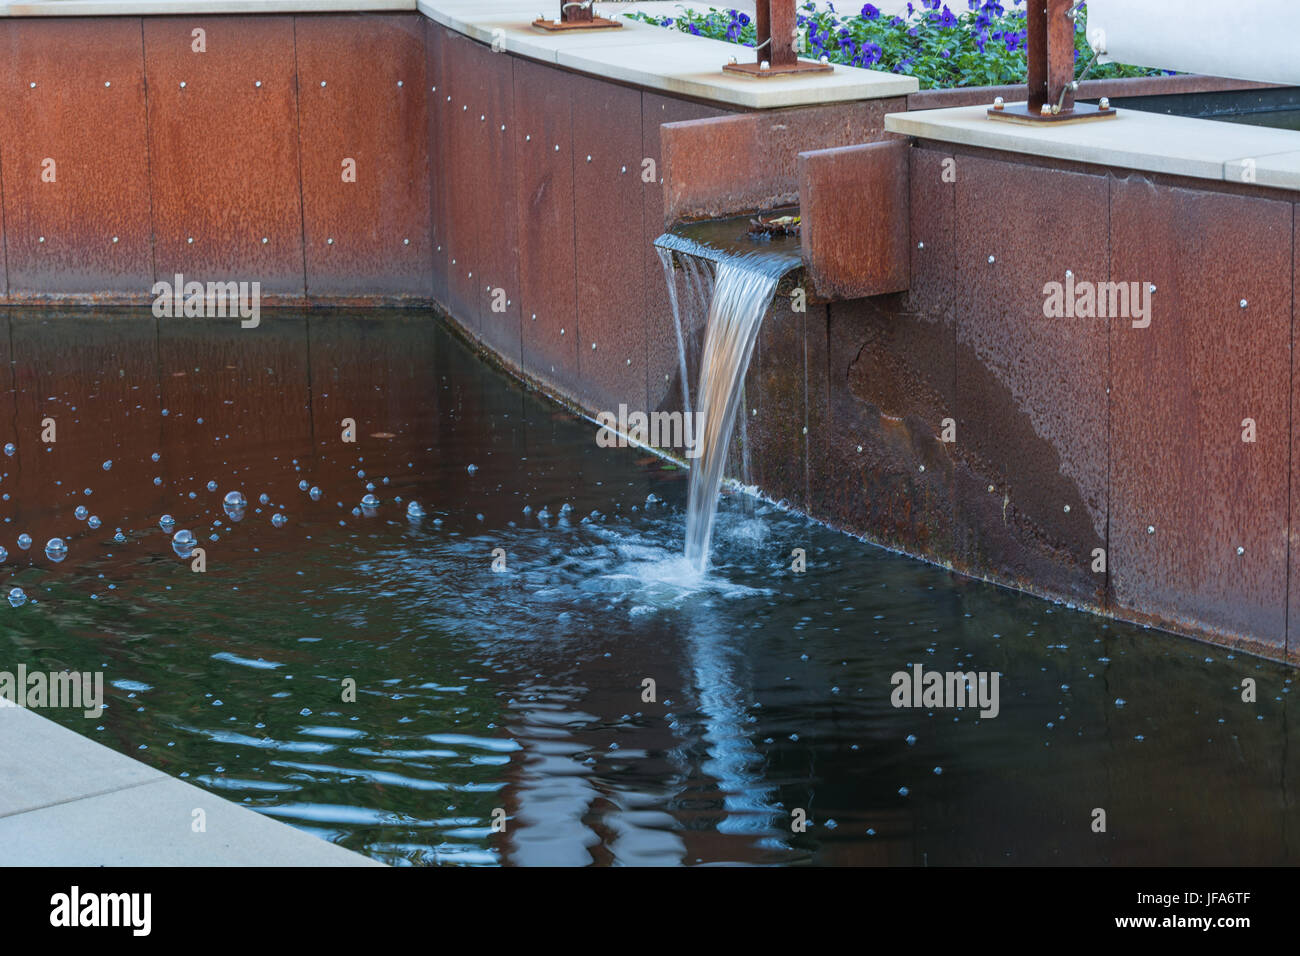 Water supply for a garden pond. Stock Photo